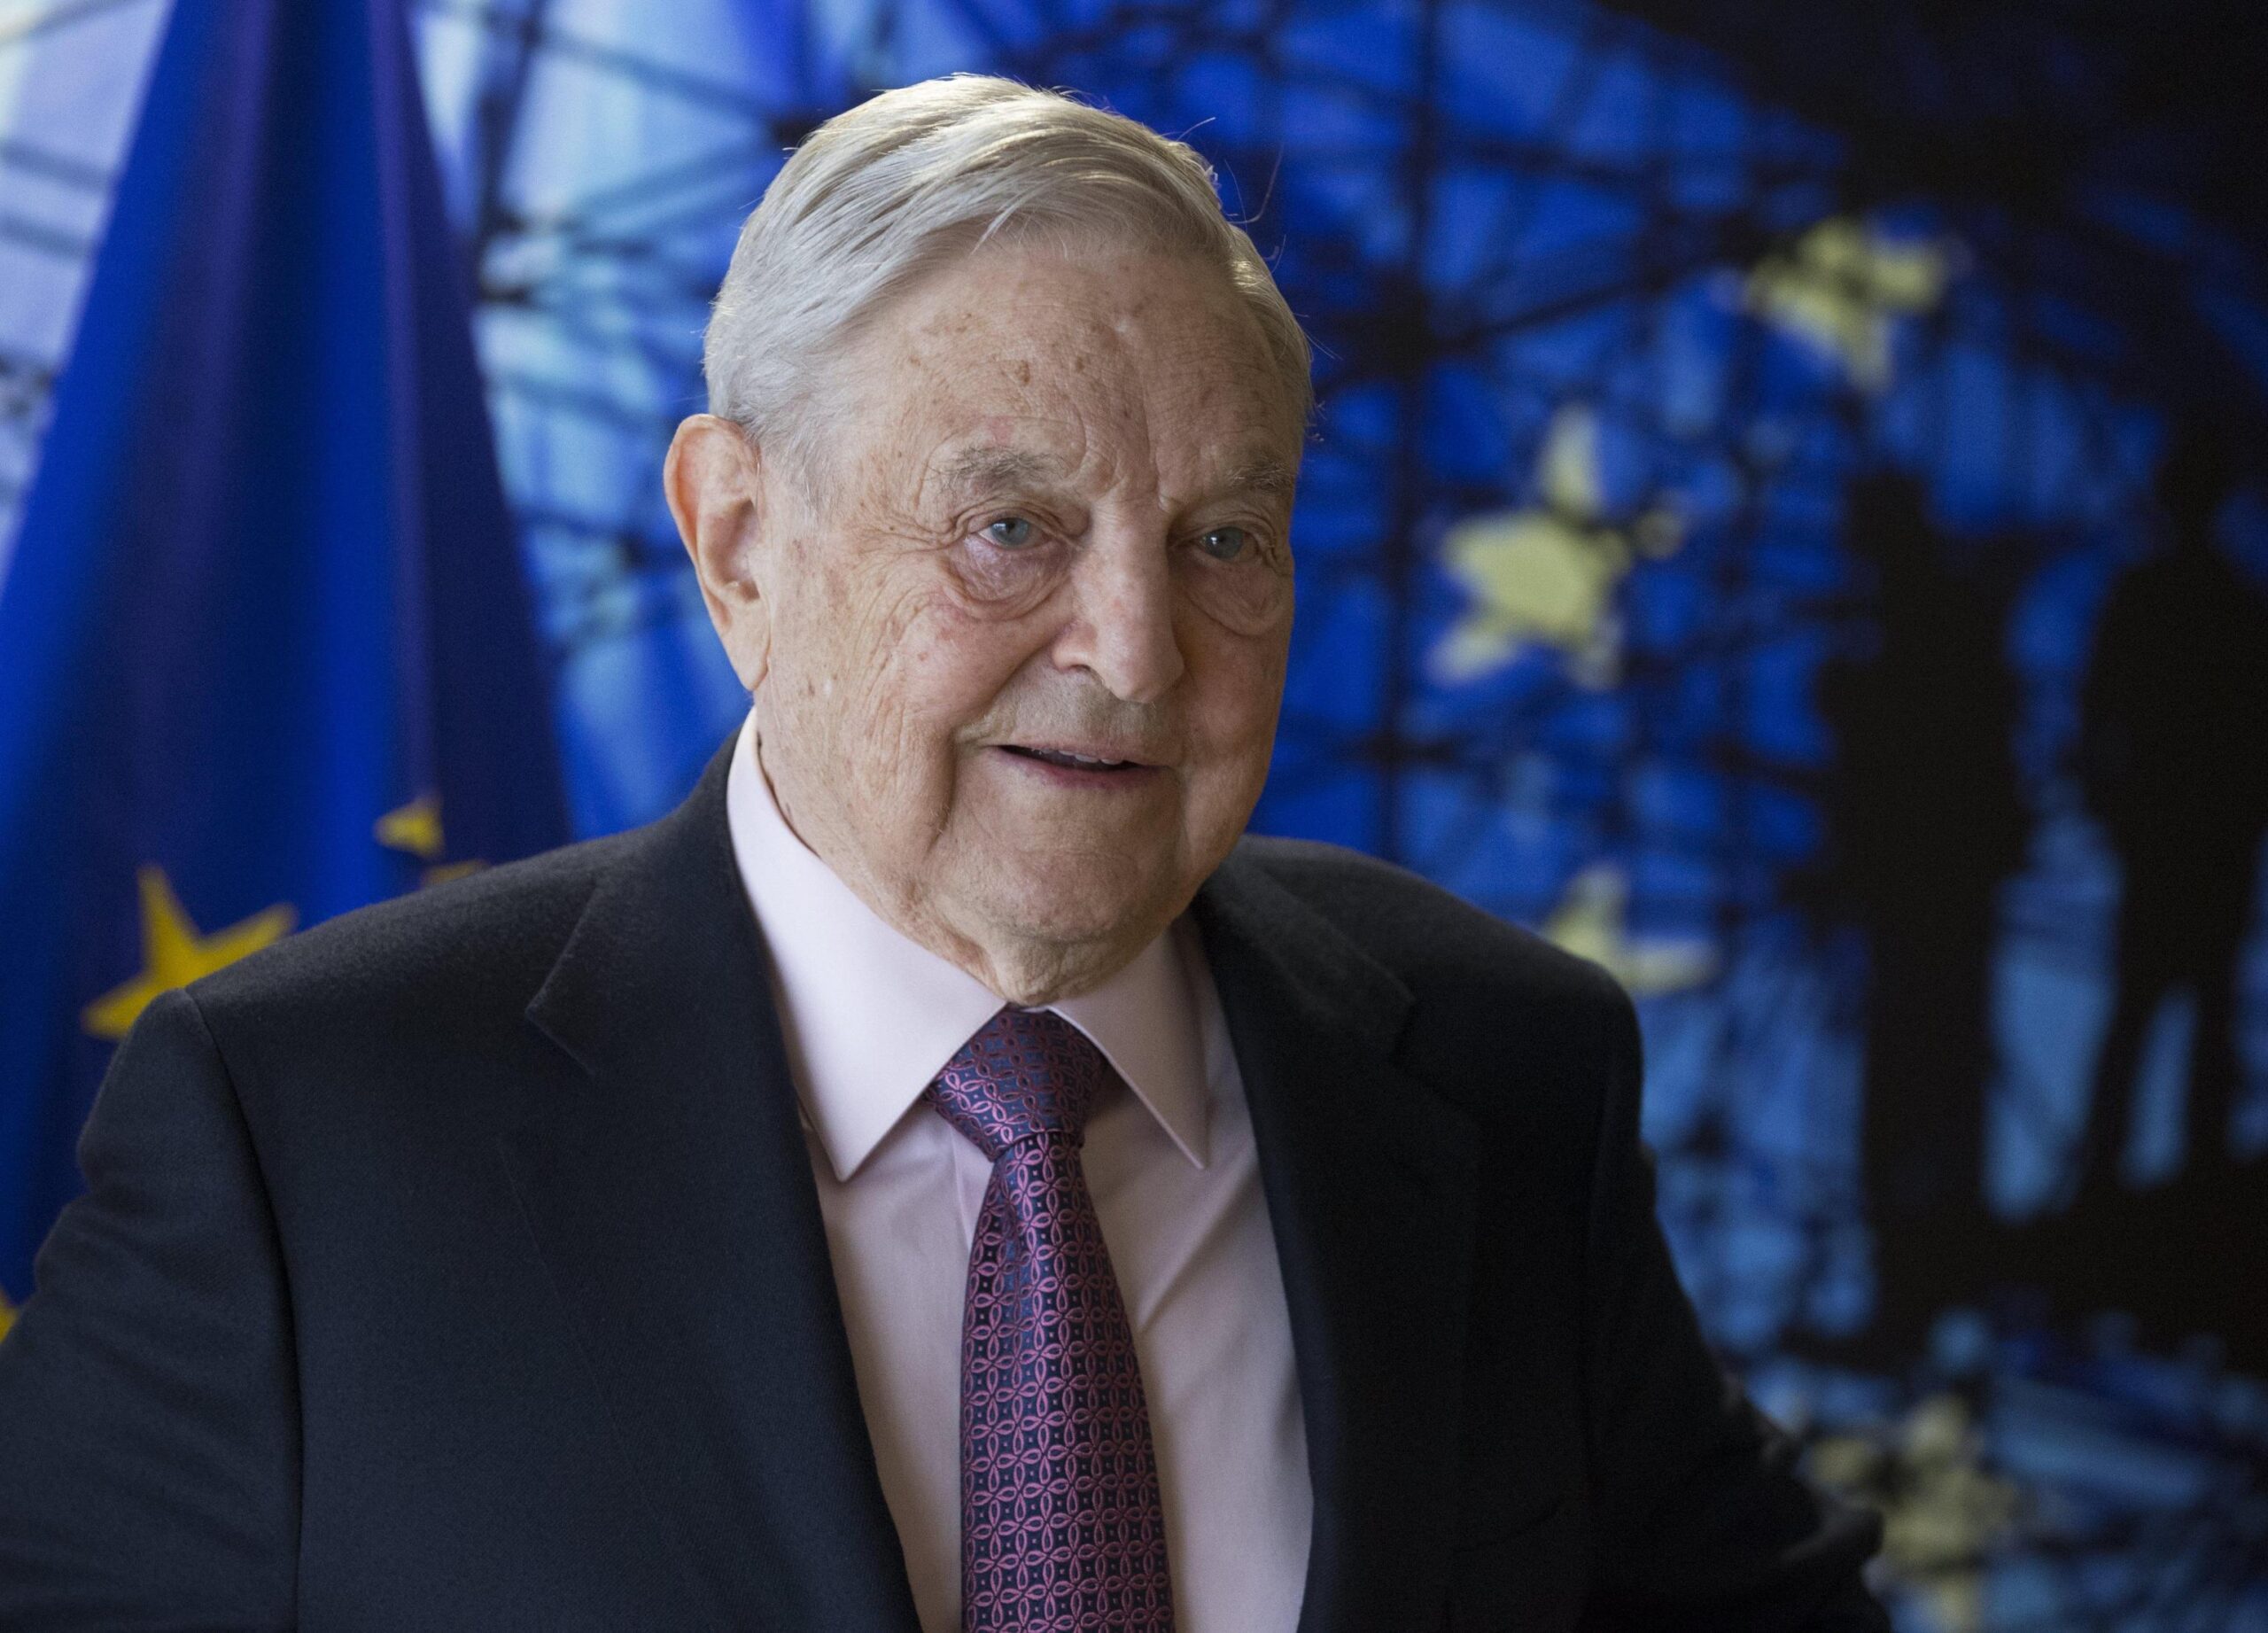 epa05930376 George Soros, founder and chairman of the Open Society Foundations prior to a meeting with EU commission President Jean-Claude Juncker (unseen) in Brussels, Belgium, 27 April  2017. The meeting will mainly focus on  the situation in Hungary, including legislative measures that could force the closure of the Central European University in Budapest.  EPA/OLIVIER HOSLET / POOL